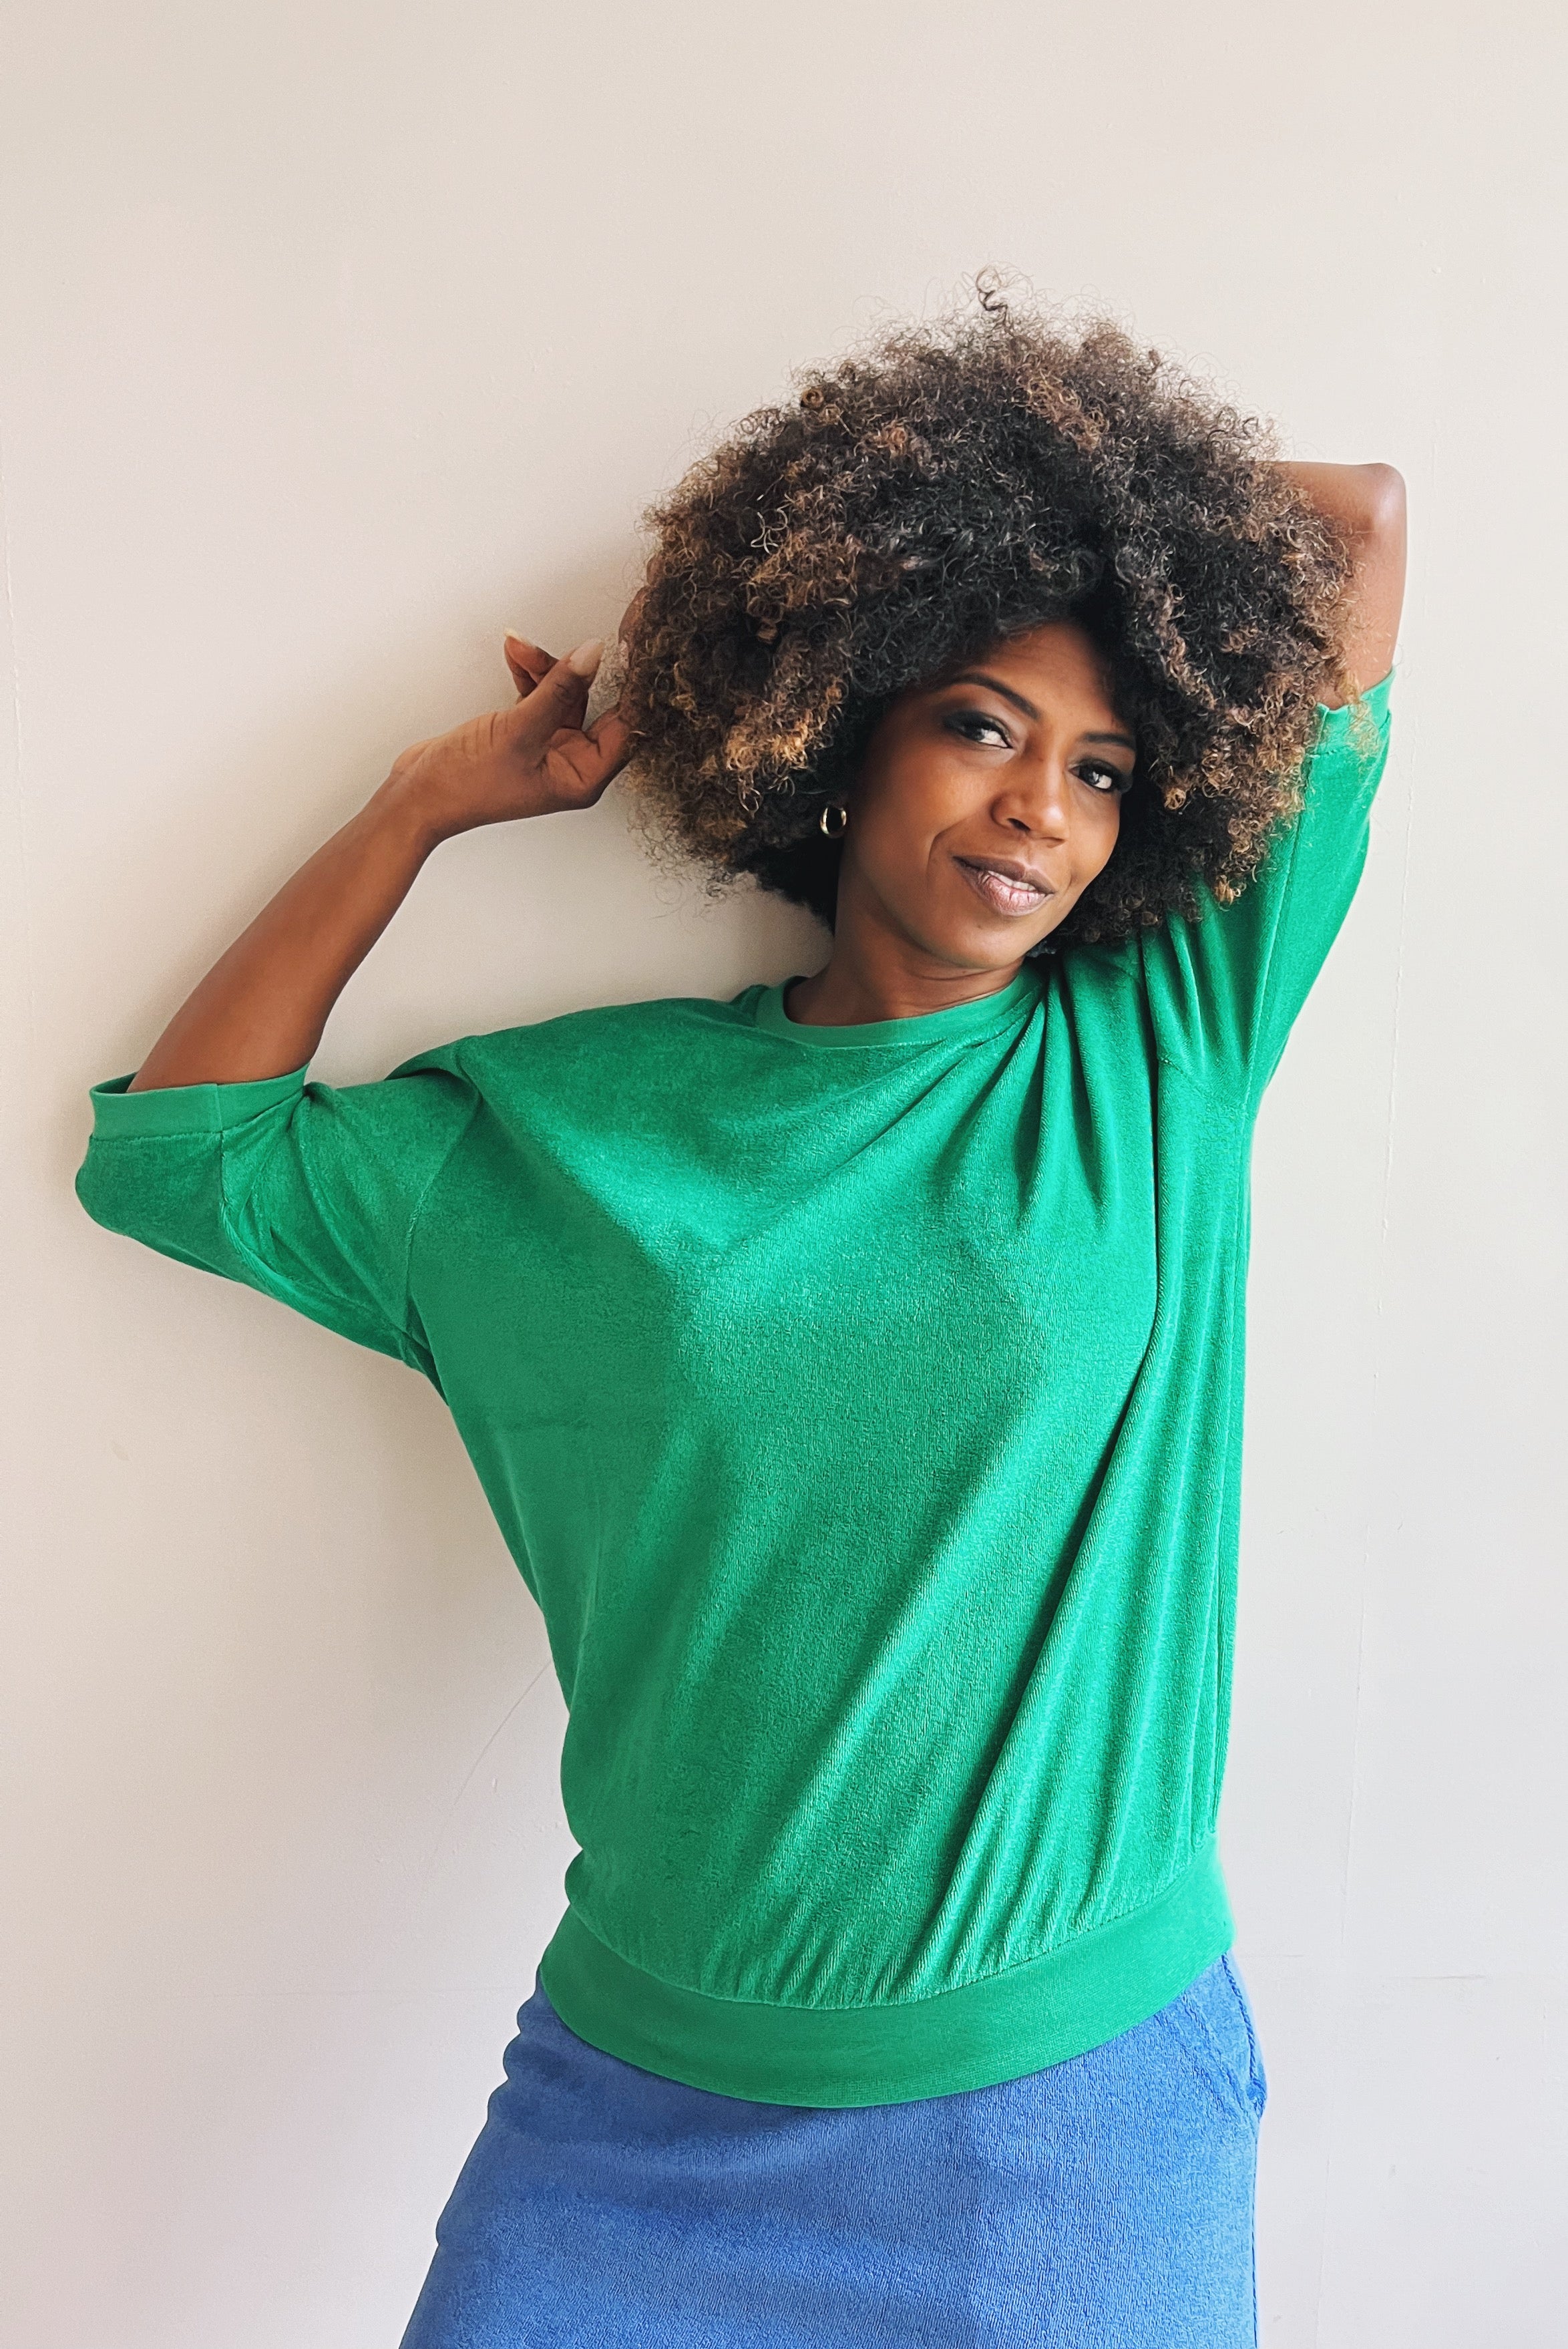 the dão store - Midsleeve Sweater Coco - Jelly Bean Green Terry - Sweaters | Hoodies